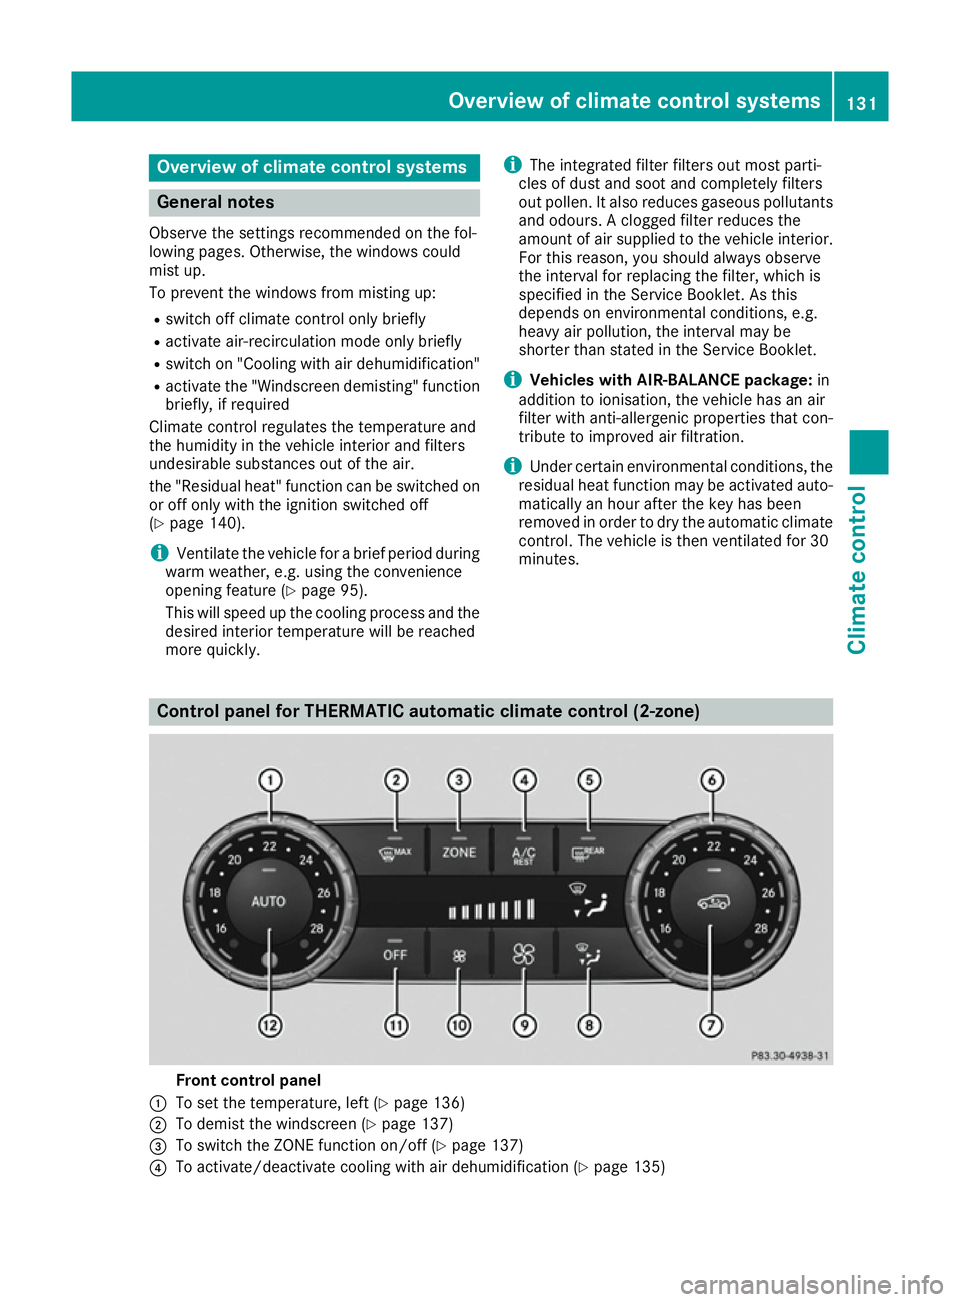 MERCEDES-BENZ GLS SUV 2016  Owners Manual Overview of climate control systems
General notes
Observe the settings recommended on the fol-
lowing pages. Otherwise, the windows could
mist up.
To prevent the windows from misting up:
R switch off 